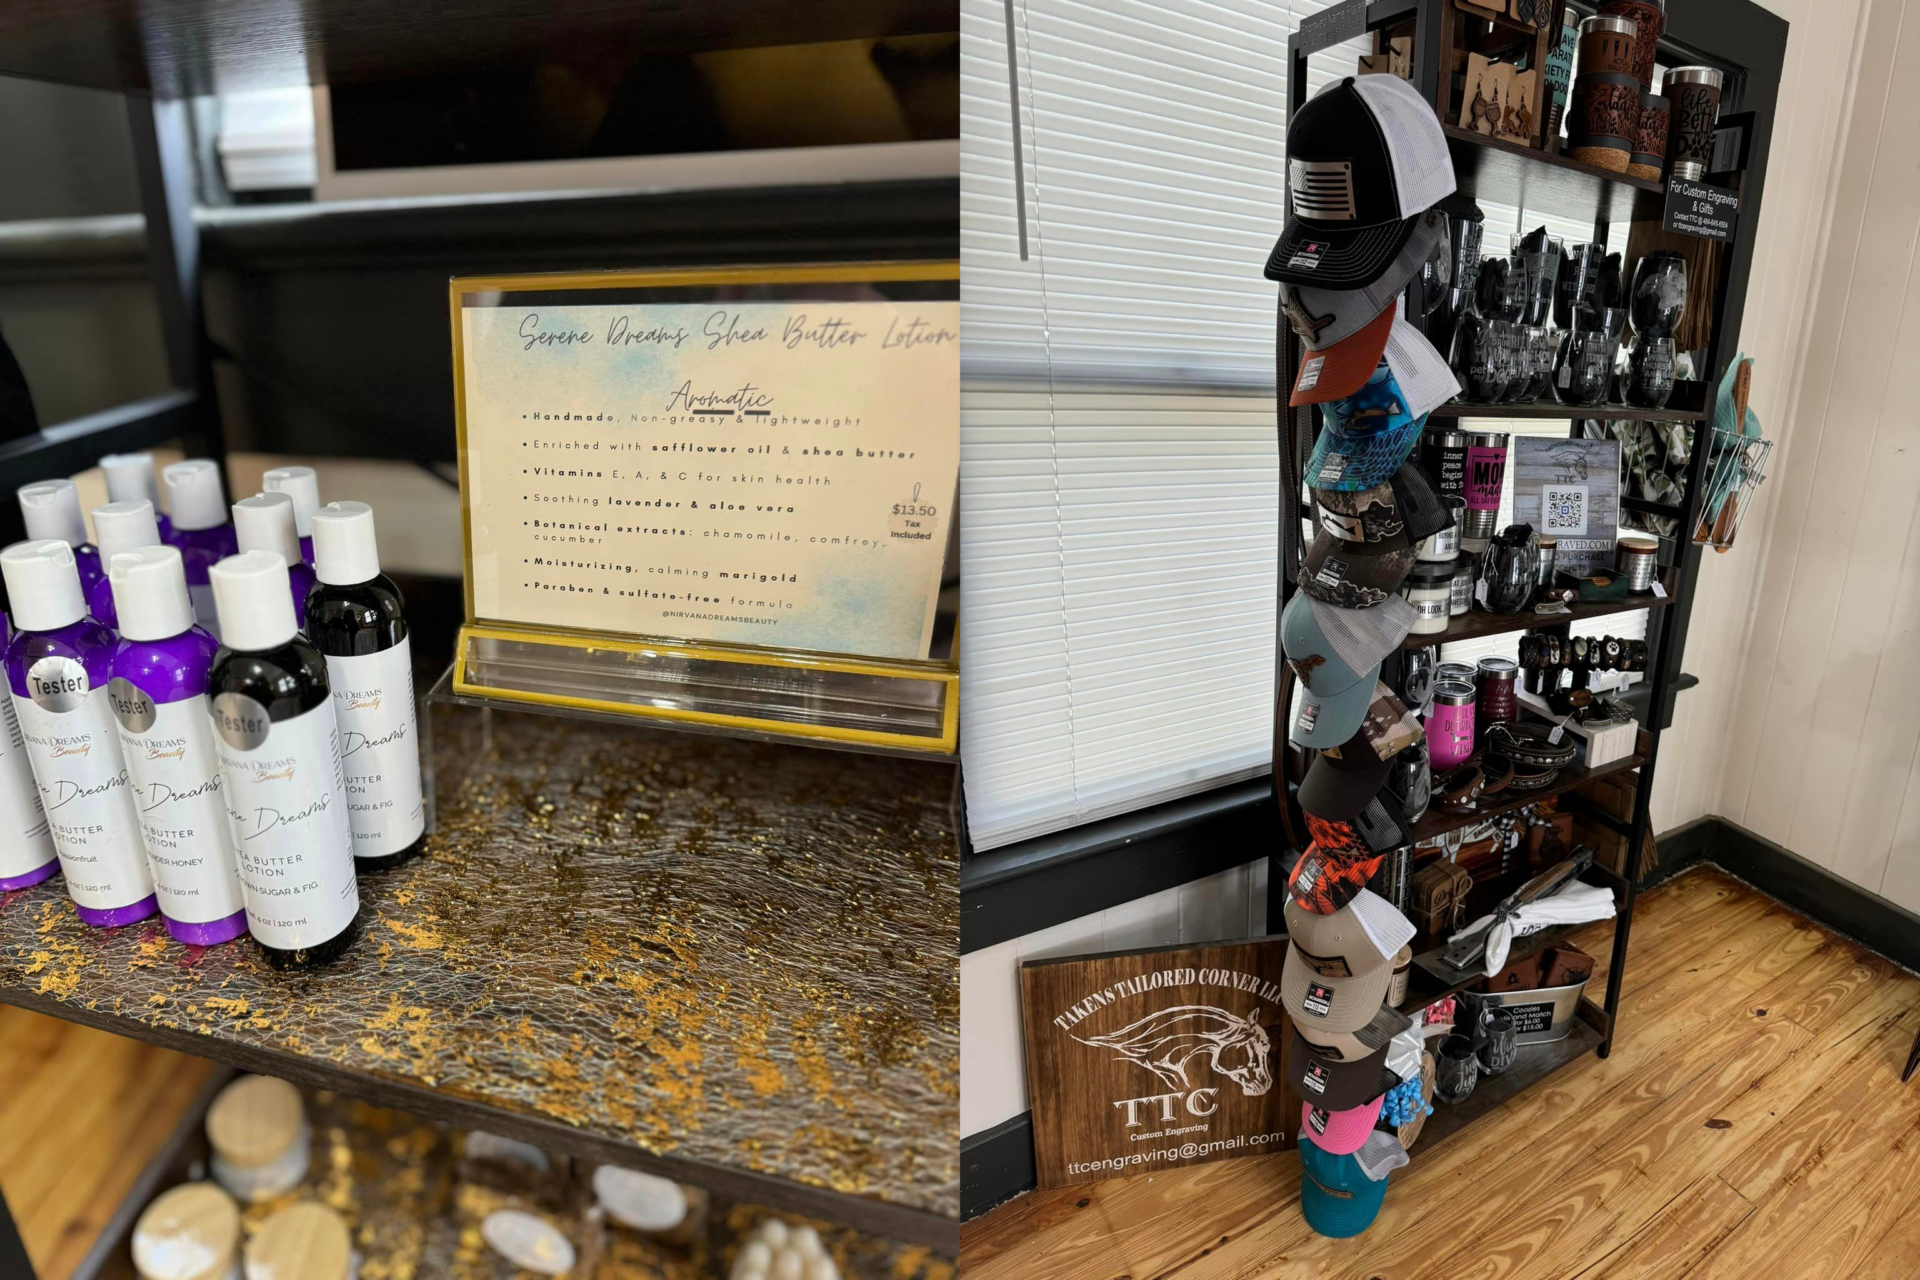 The Shoppes on 12th offers products from multiple Ocala based small businesses, including Nirvana Dreams Beauty and Takens Tailored Corner LLC. Photos byThe Shoppes on 12th